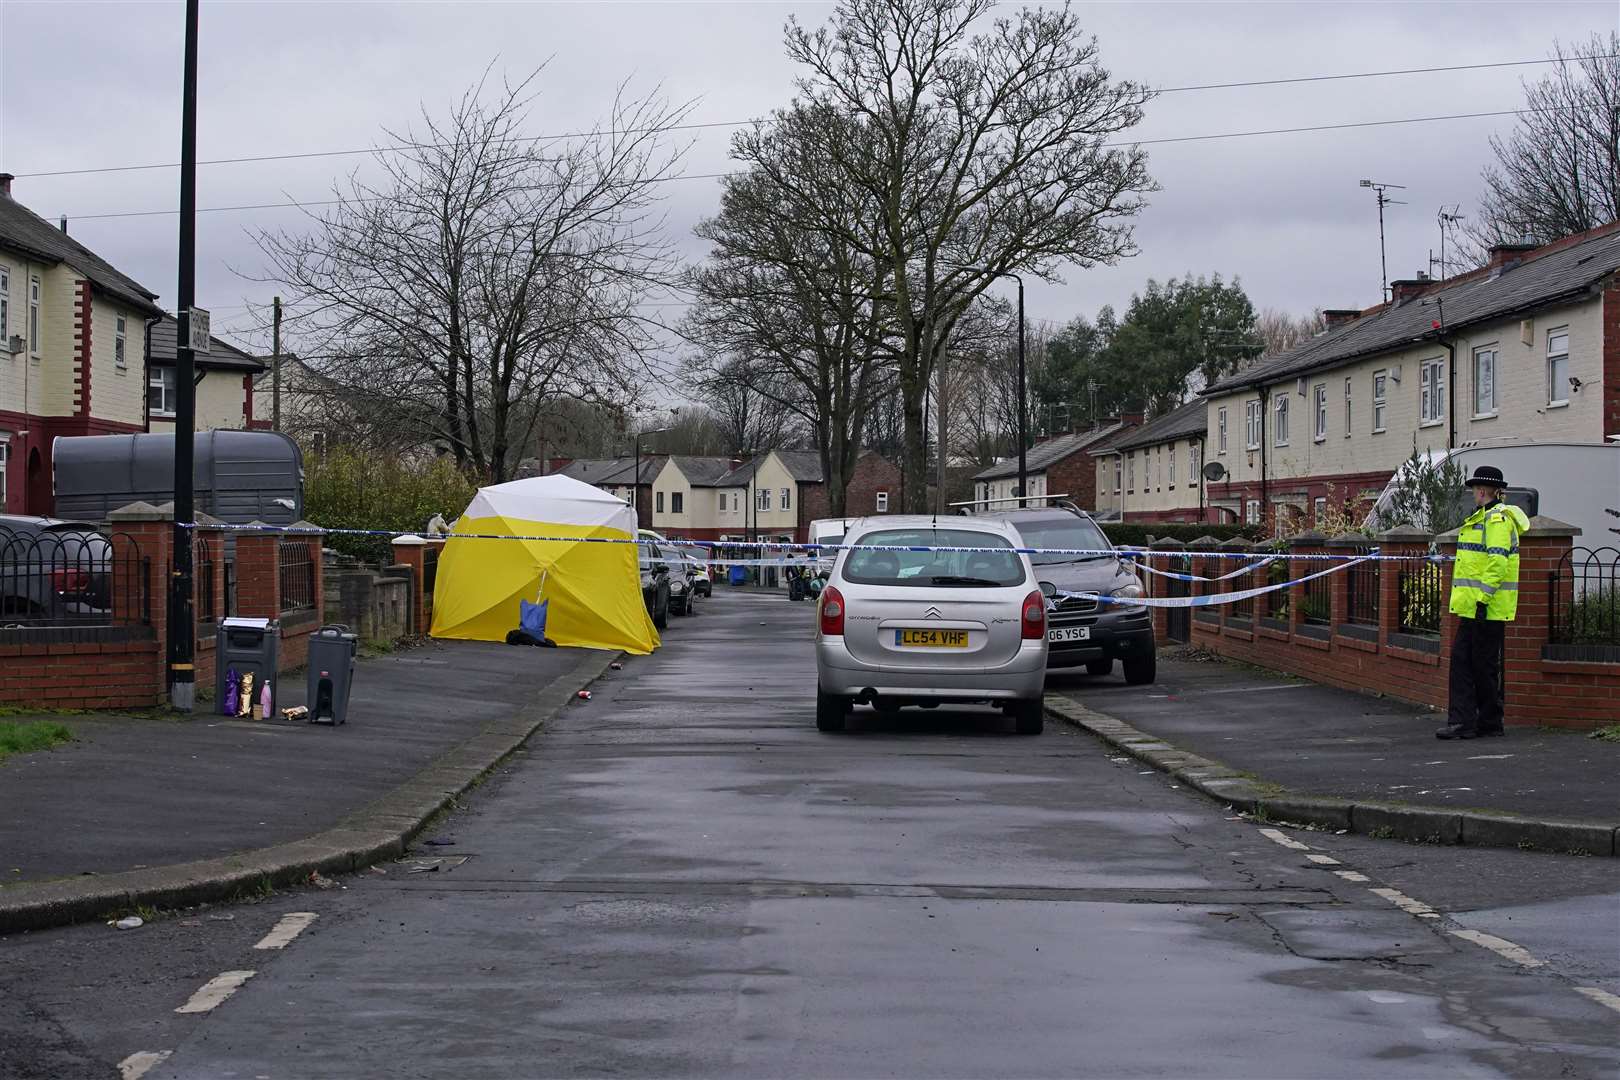 A forensic tent on Thirlmere Avenue in Stretford, Manchester, near to the scene where a 16-year-old boy was fatally stabbed (Peter Byrne/PA) 